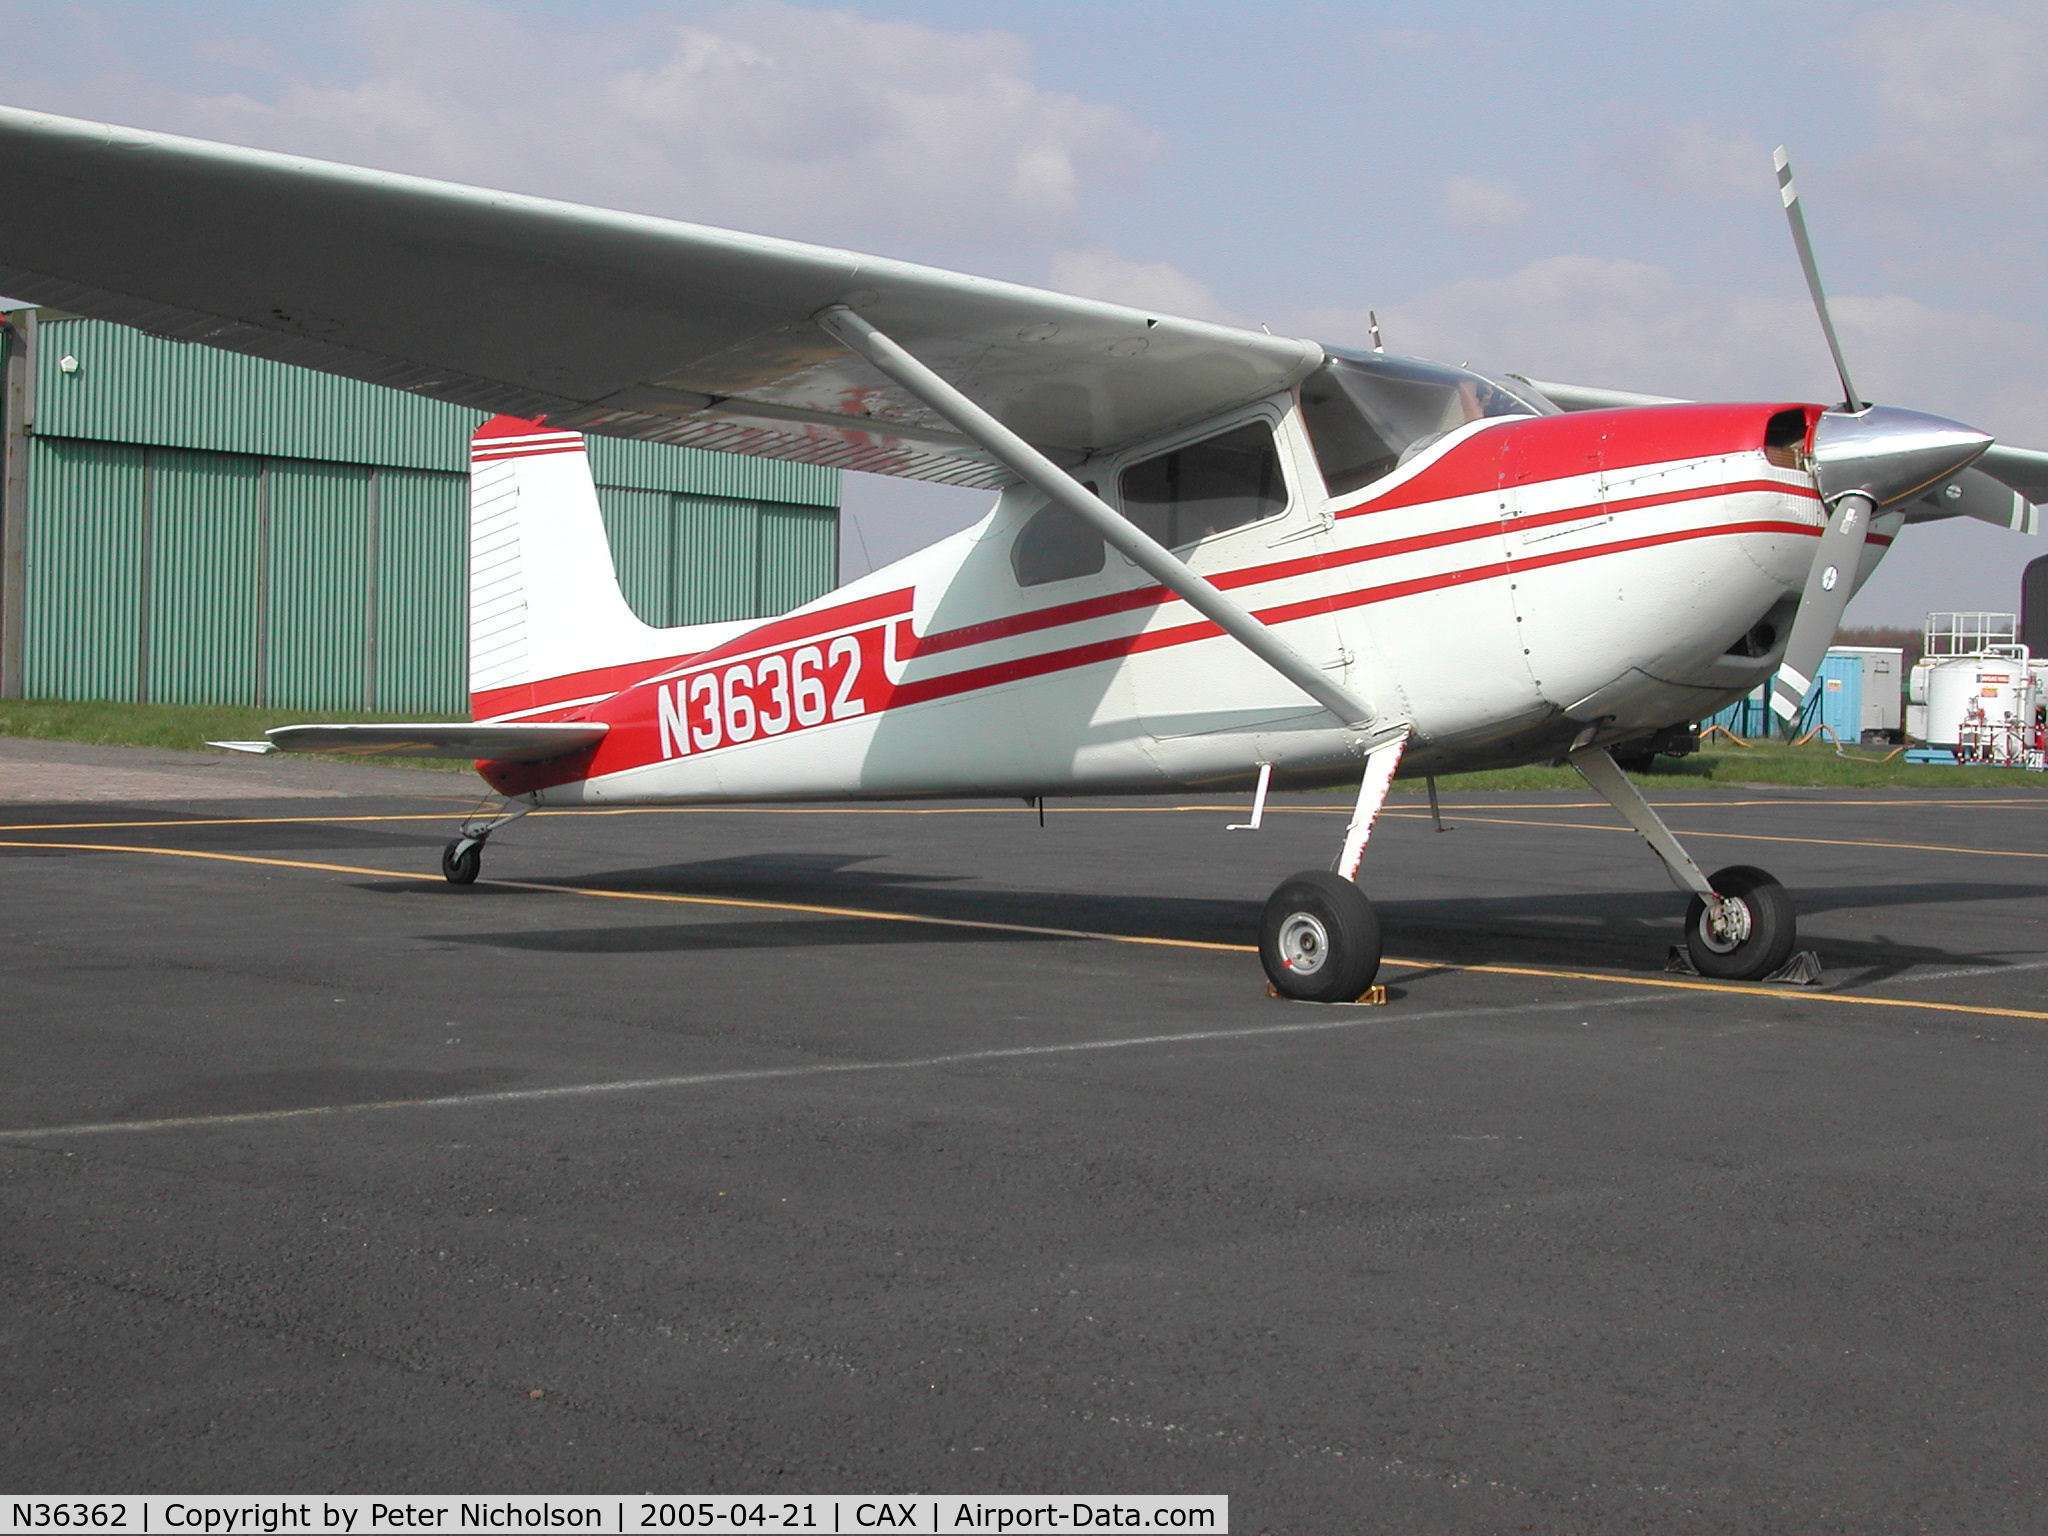 N36362, 1955 Cessna 180 C/N 31691, This Cessna 180 was a visitor to Carlisle in April 2005.